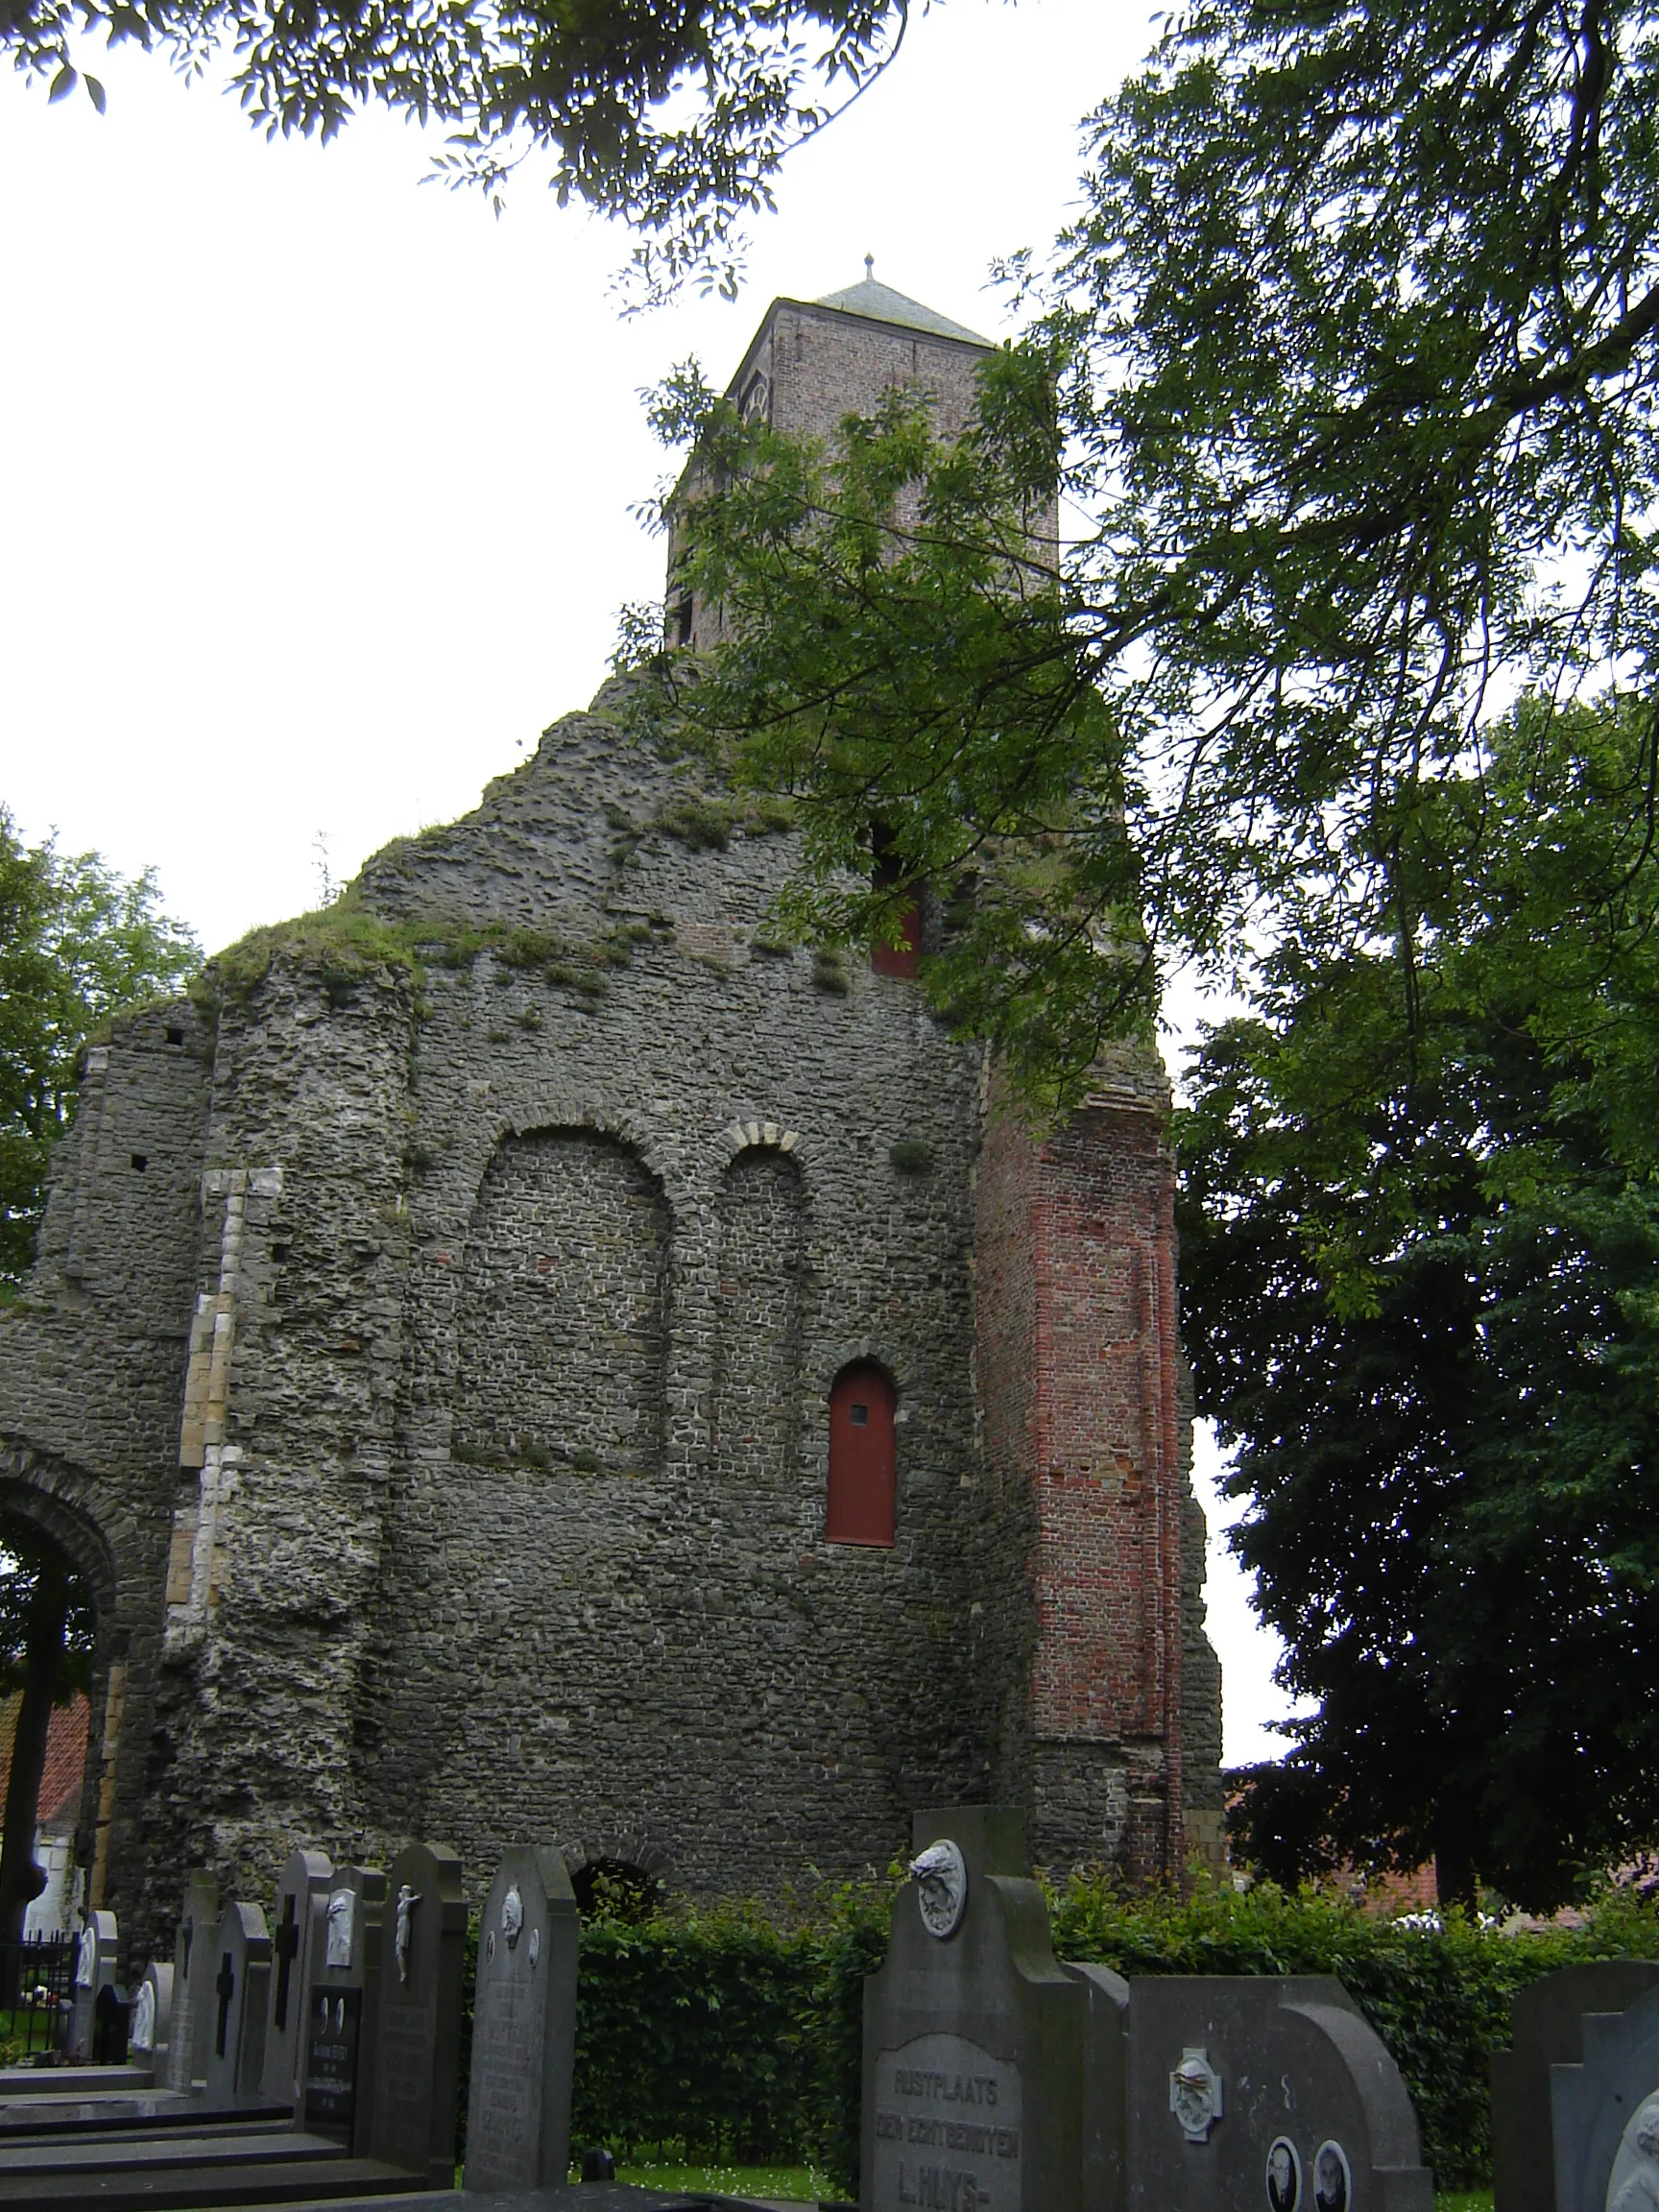 Photo showing: Old tower of the church of Saint Peter in Chains in Dudzele, Brugge, West-Flanders, Belgium.